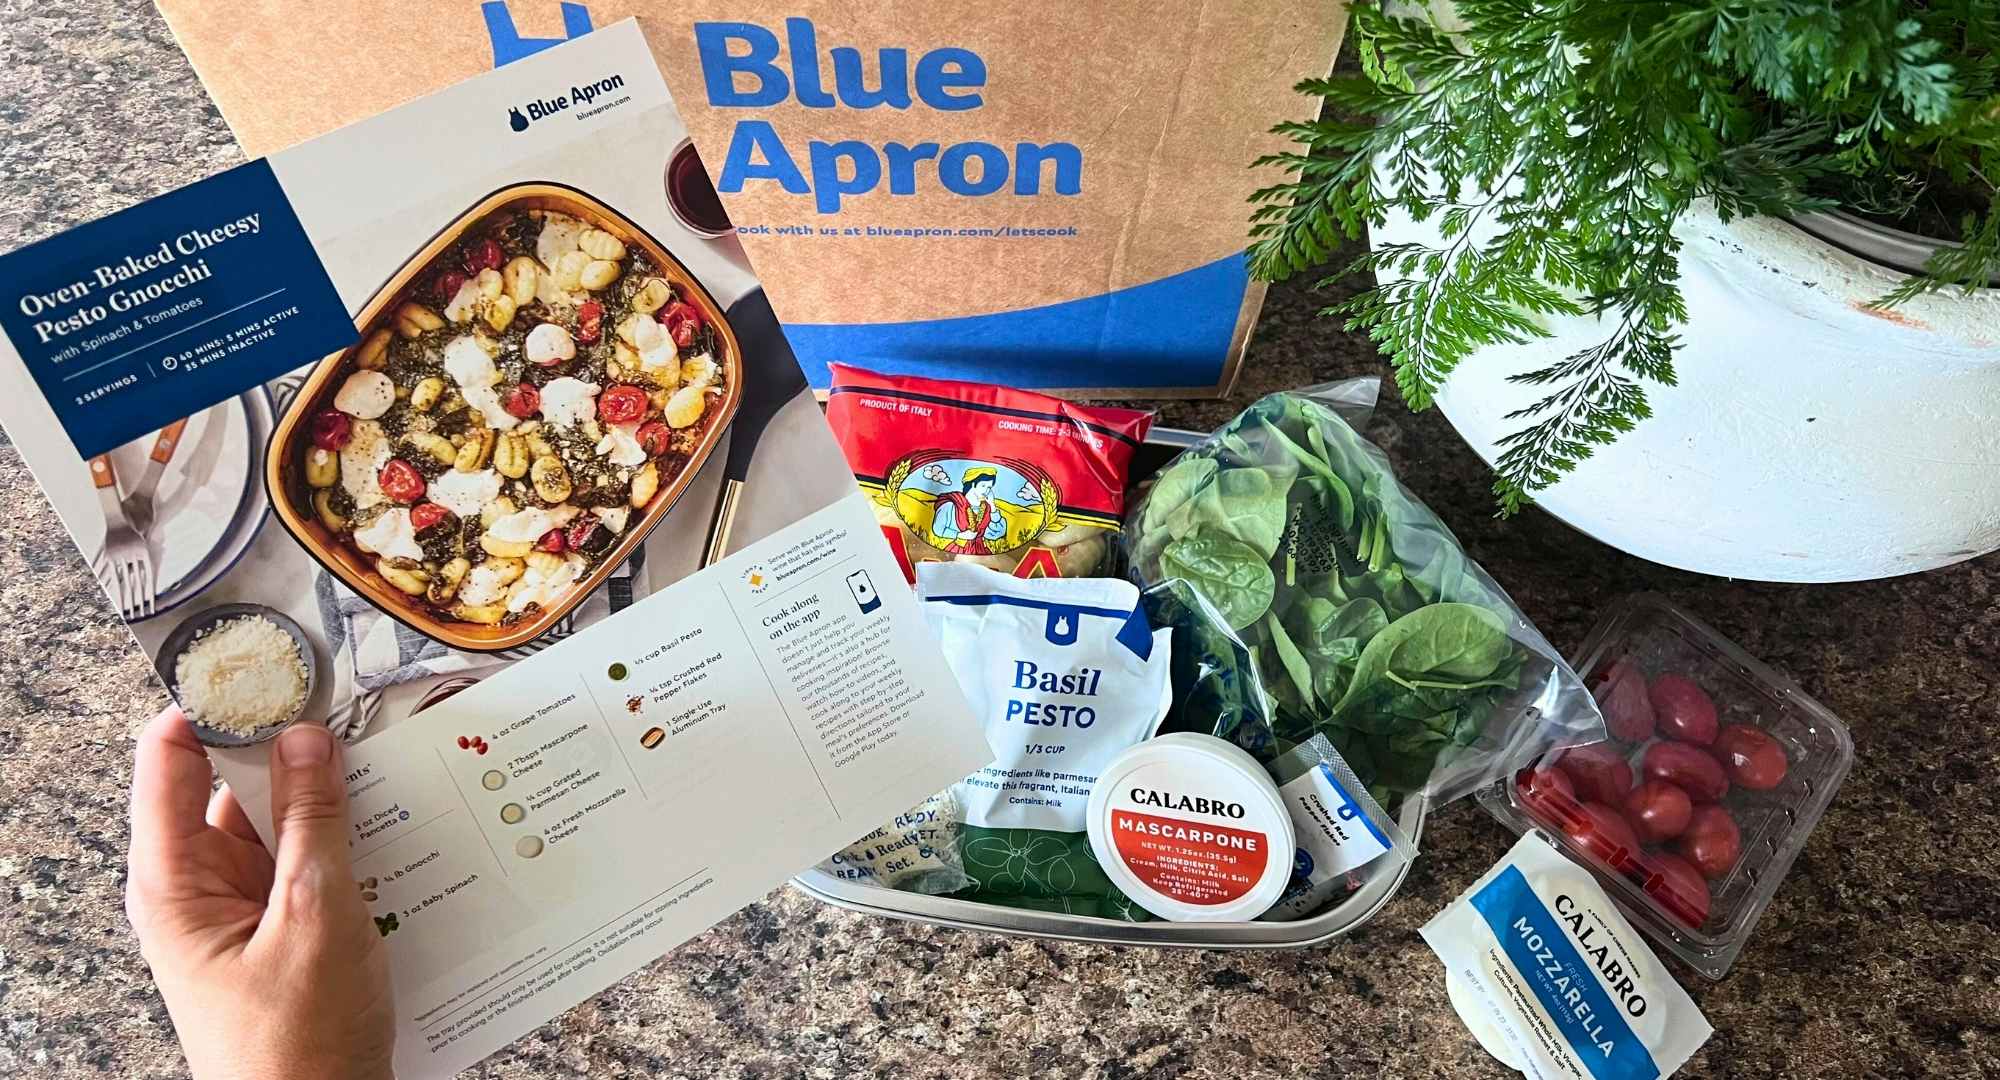 Get a Blue Apron Box for $9.96 Shipped — Only $2.49 per Serving